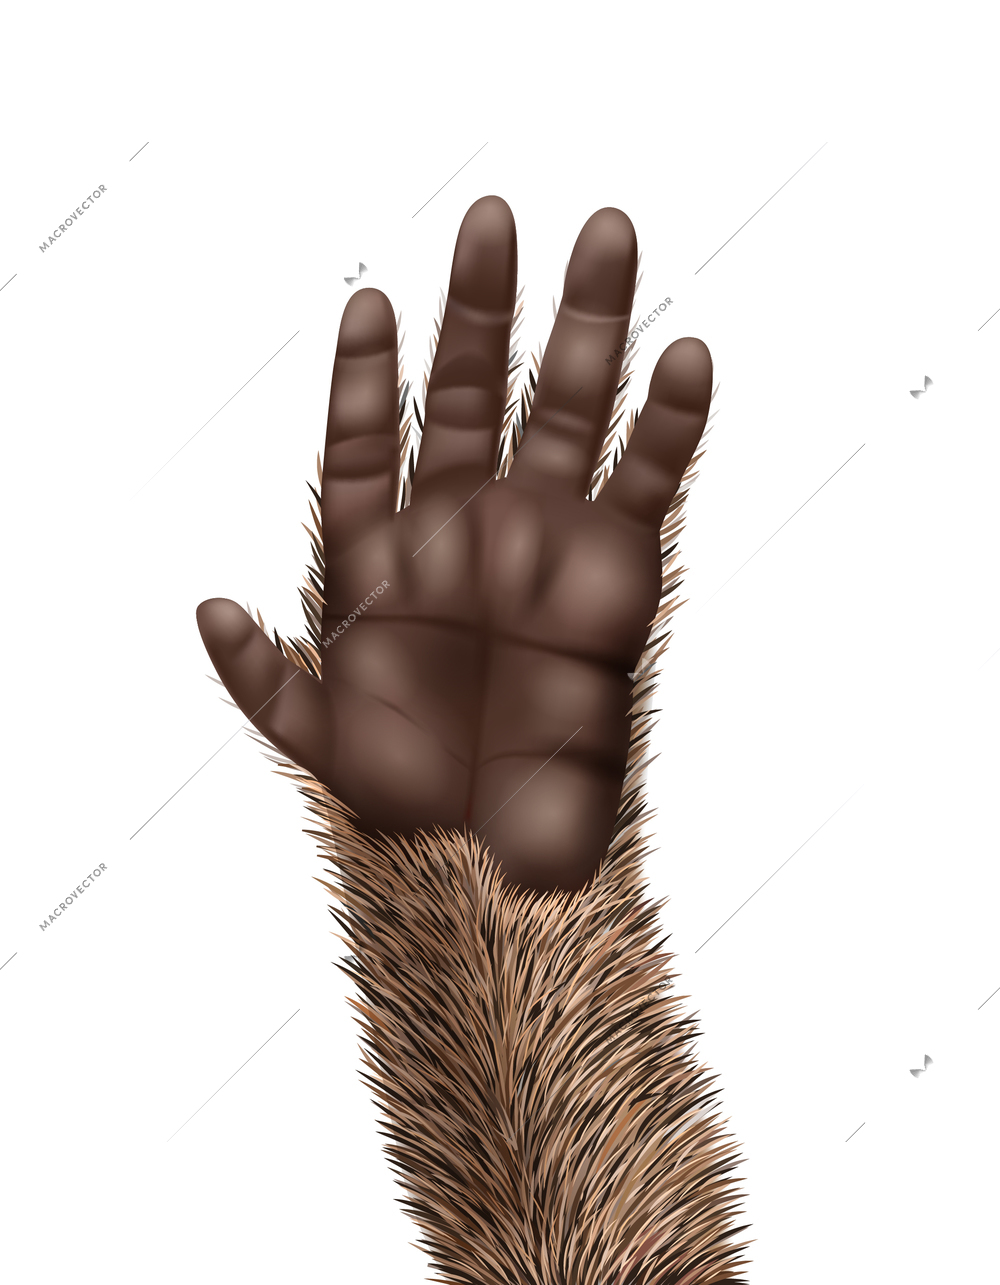 Realistic animal icon with cute monkey paw vector illustration